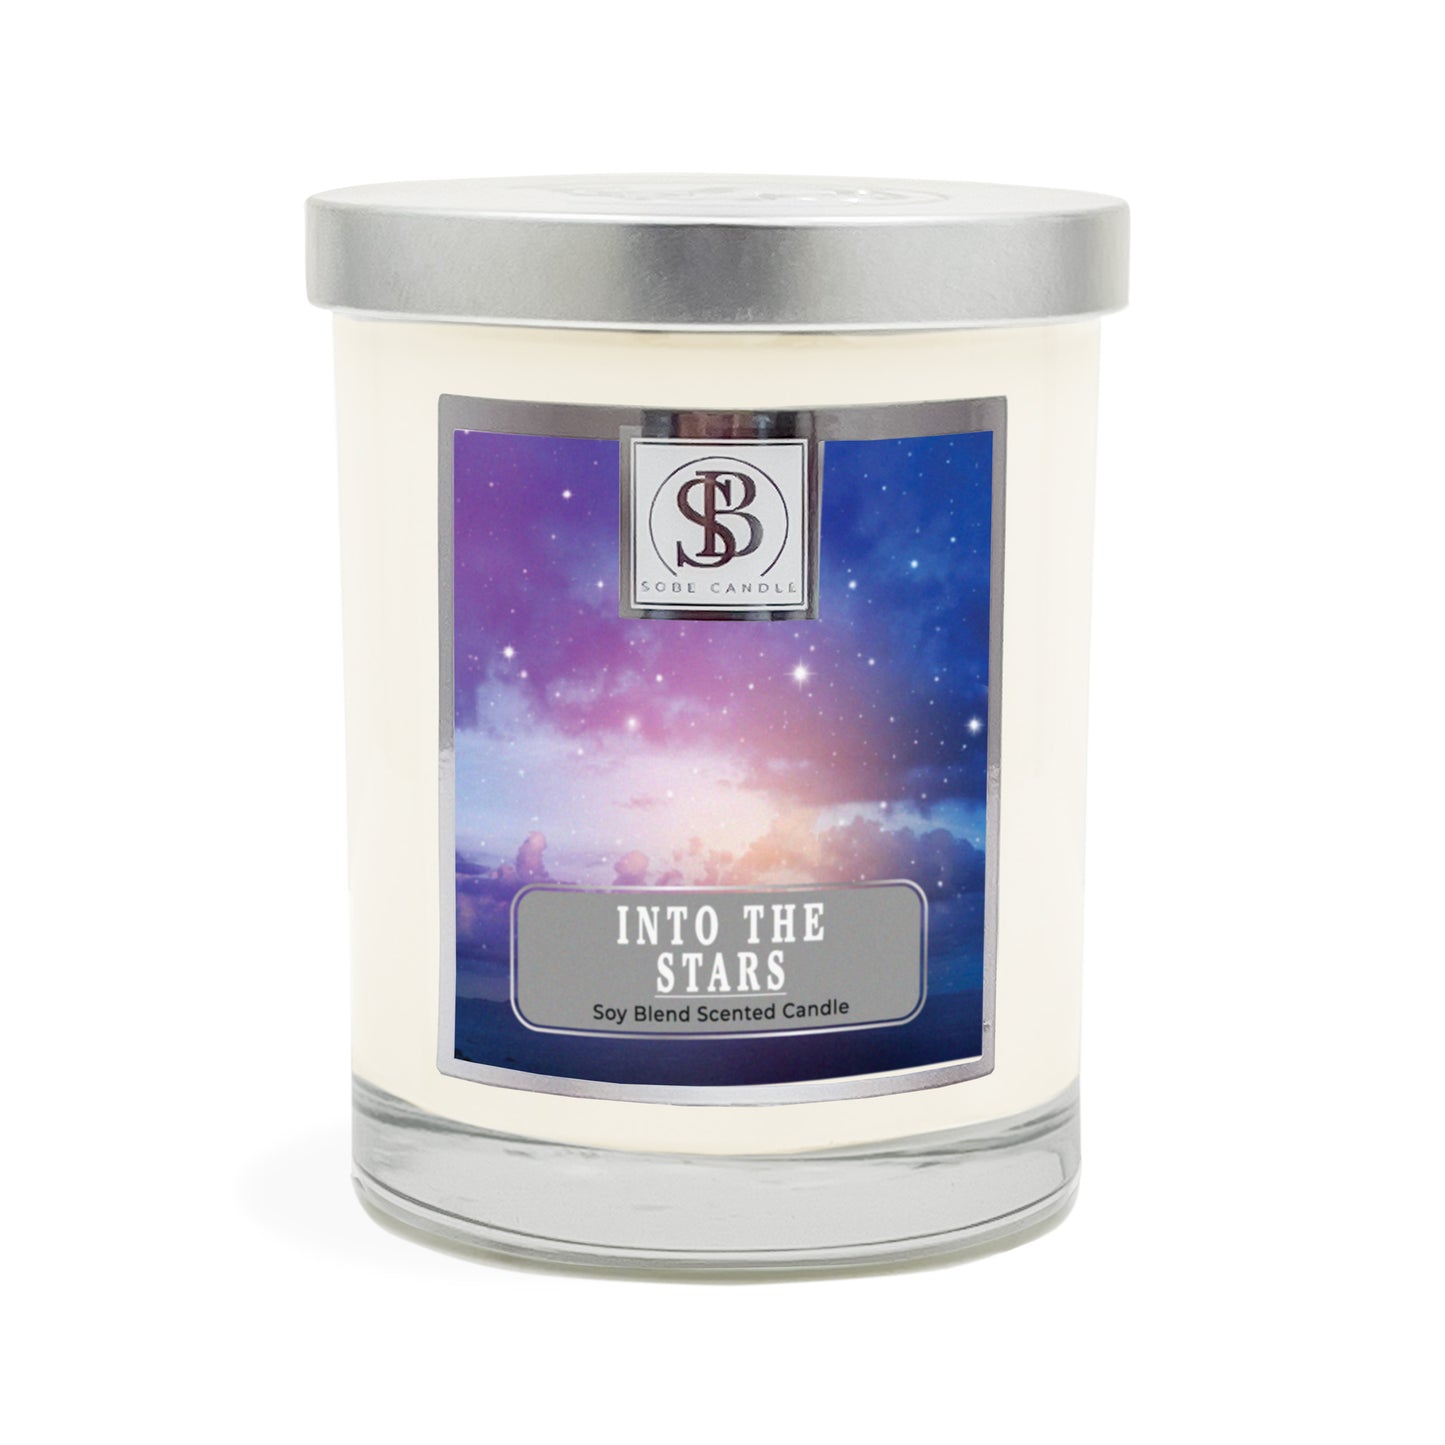 INTO THE STARS| Soy Scented Candle 11 oz